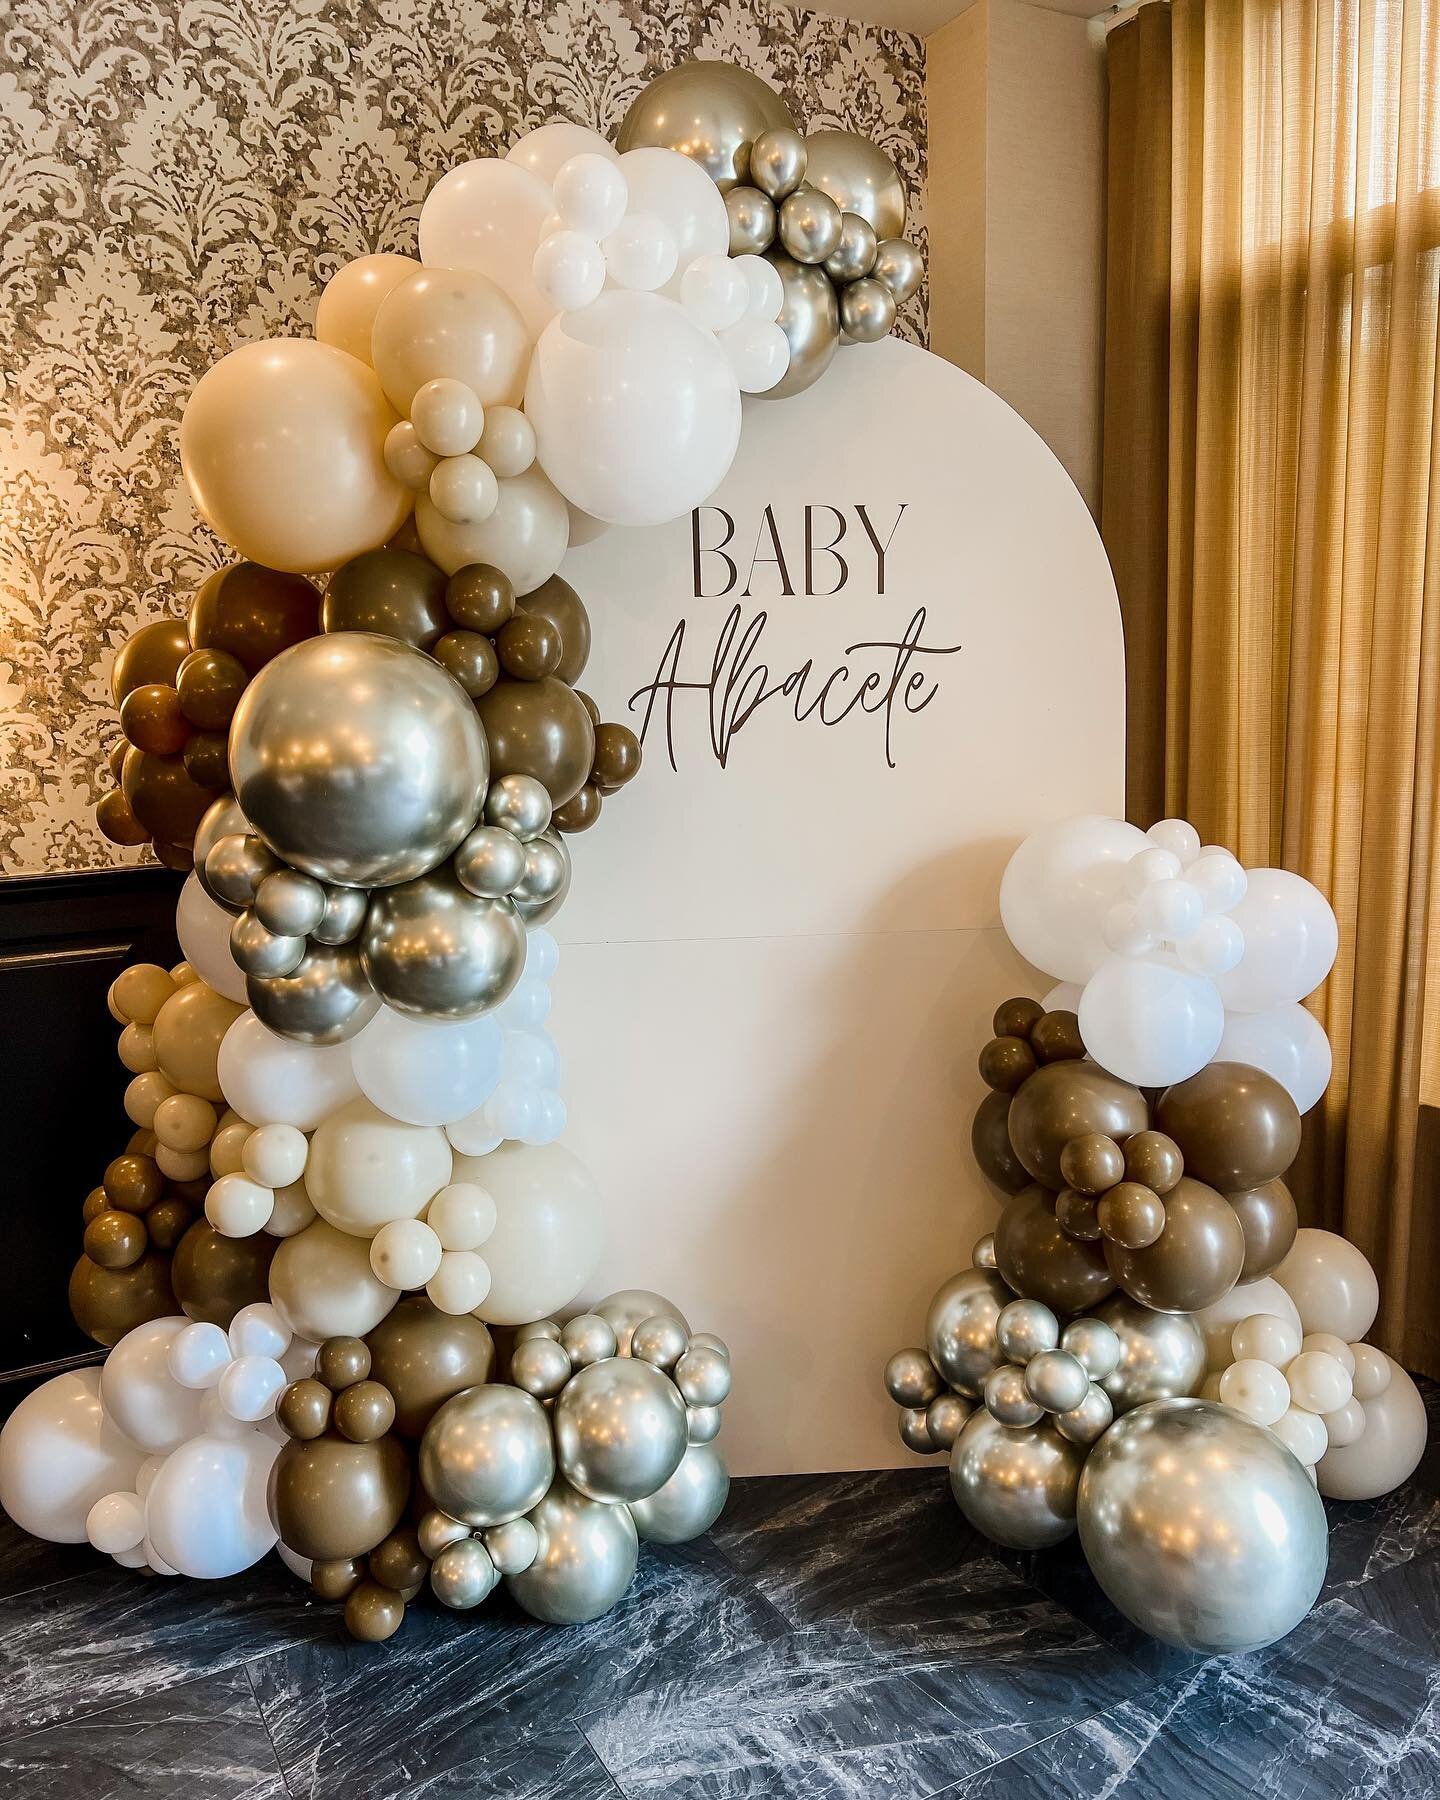 A closer look at the details from yesterday&rsquo;s boho safari themed baby shower 🐆🤍

Centerpieces/Dessert Table Styling/Backdrop/Balloons: @gingerlystyledevents 
Desserts:  @cupcakesistersbakery 
Venue: @favaitaliano 

#babyshowers #babyshoweride